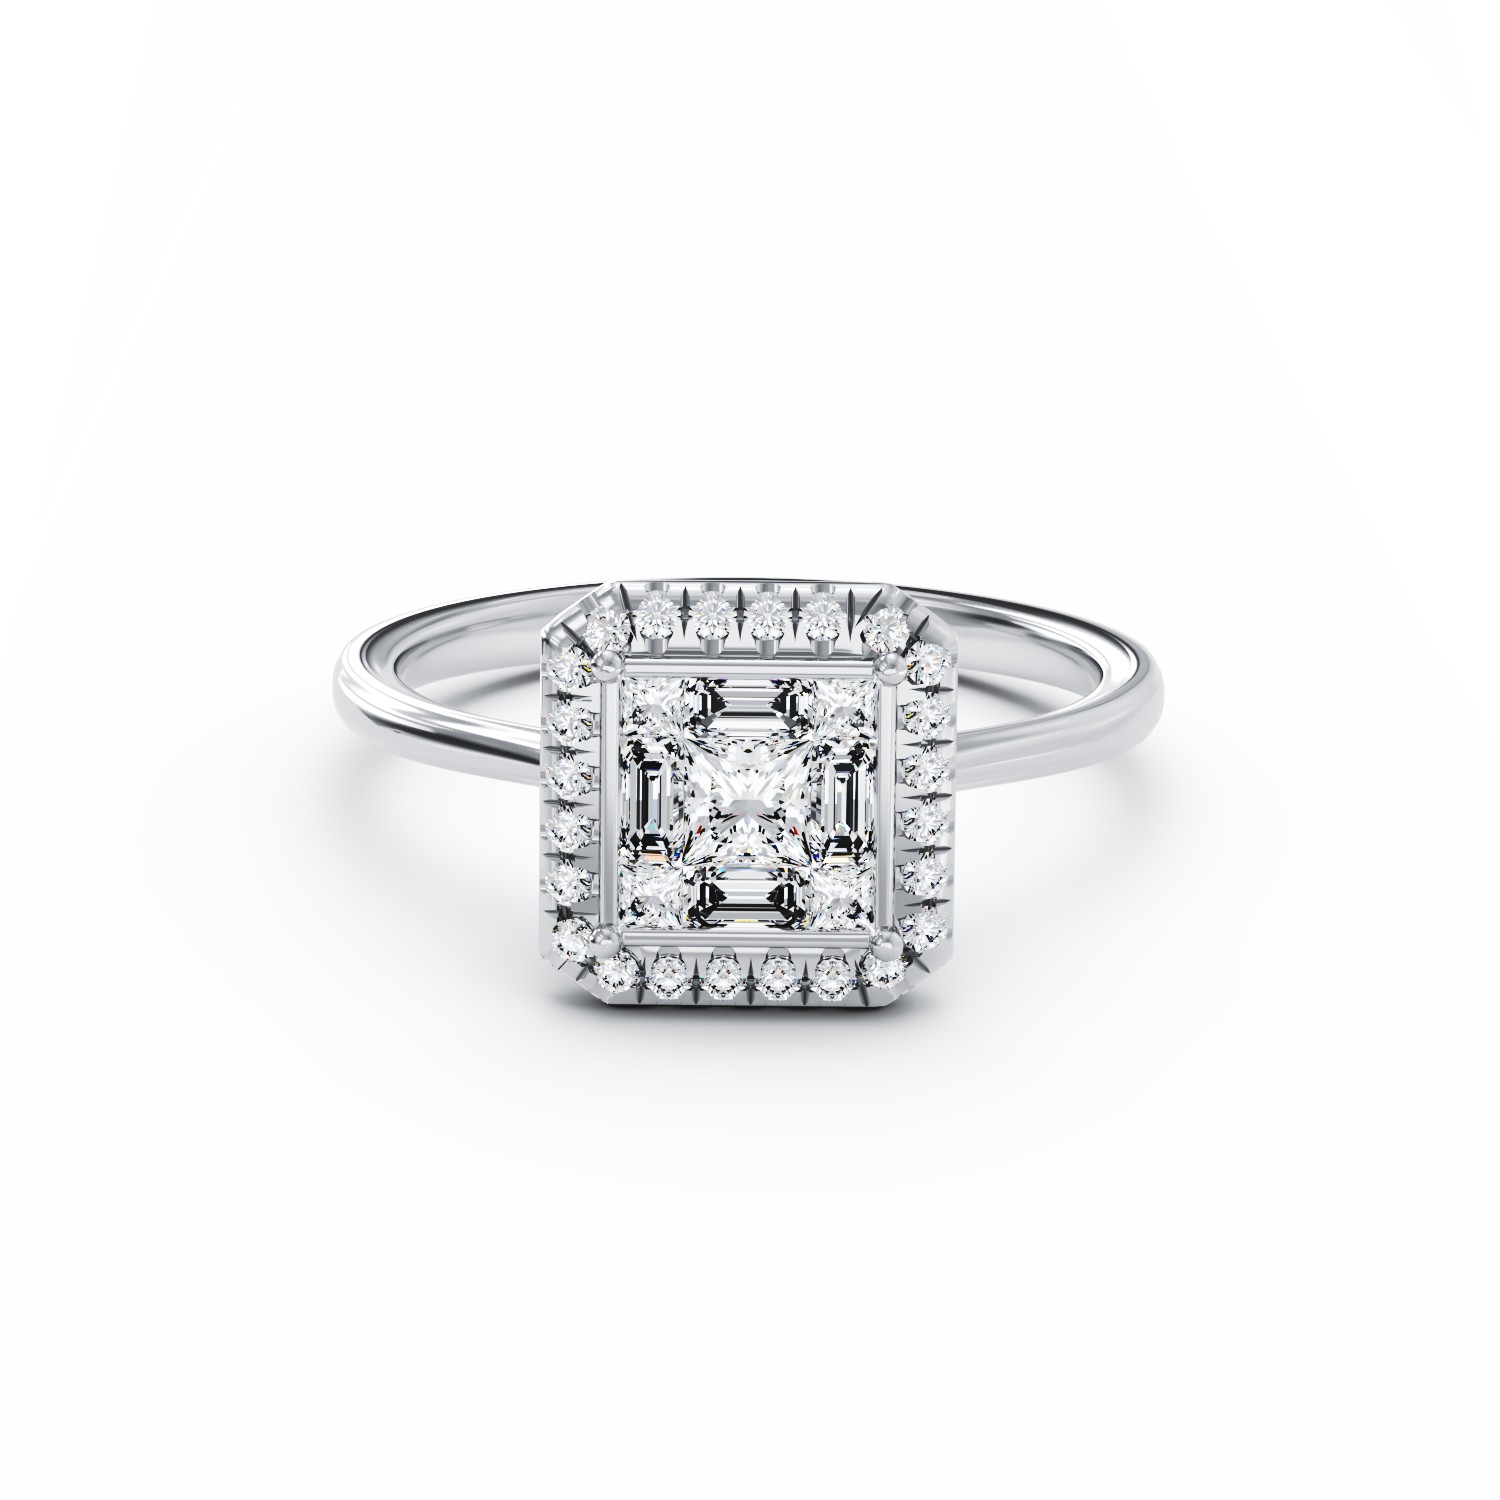 18k white gold engagement ring with 0.48ct diamonds